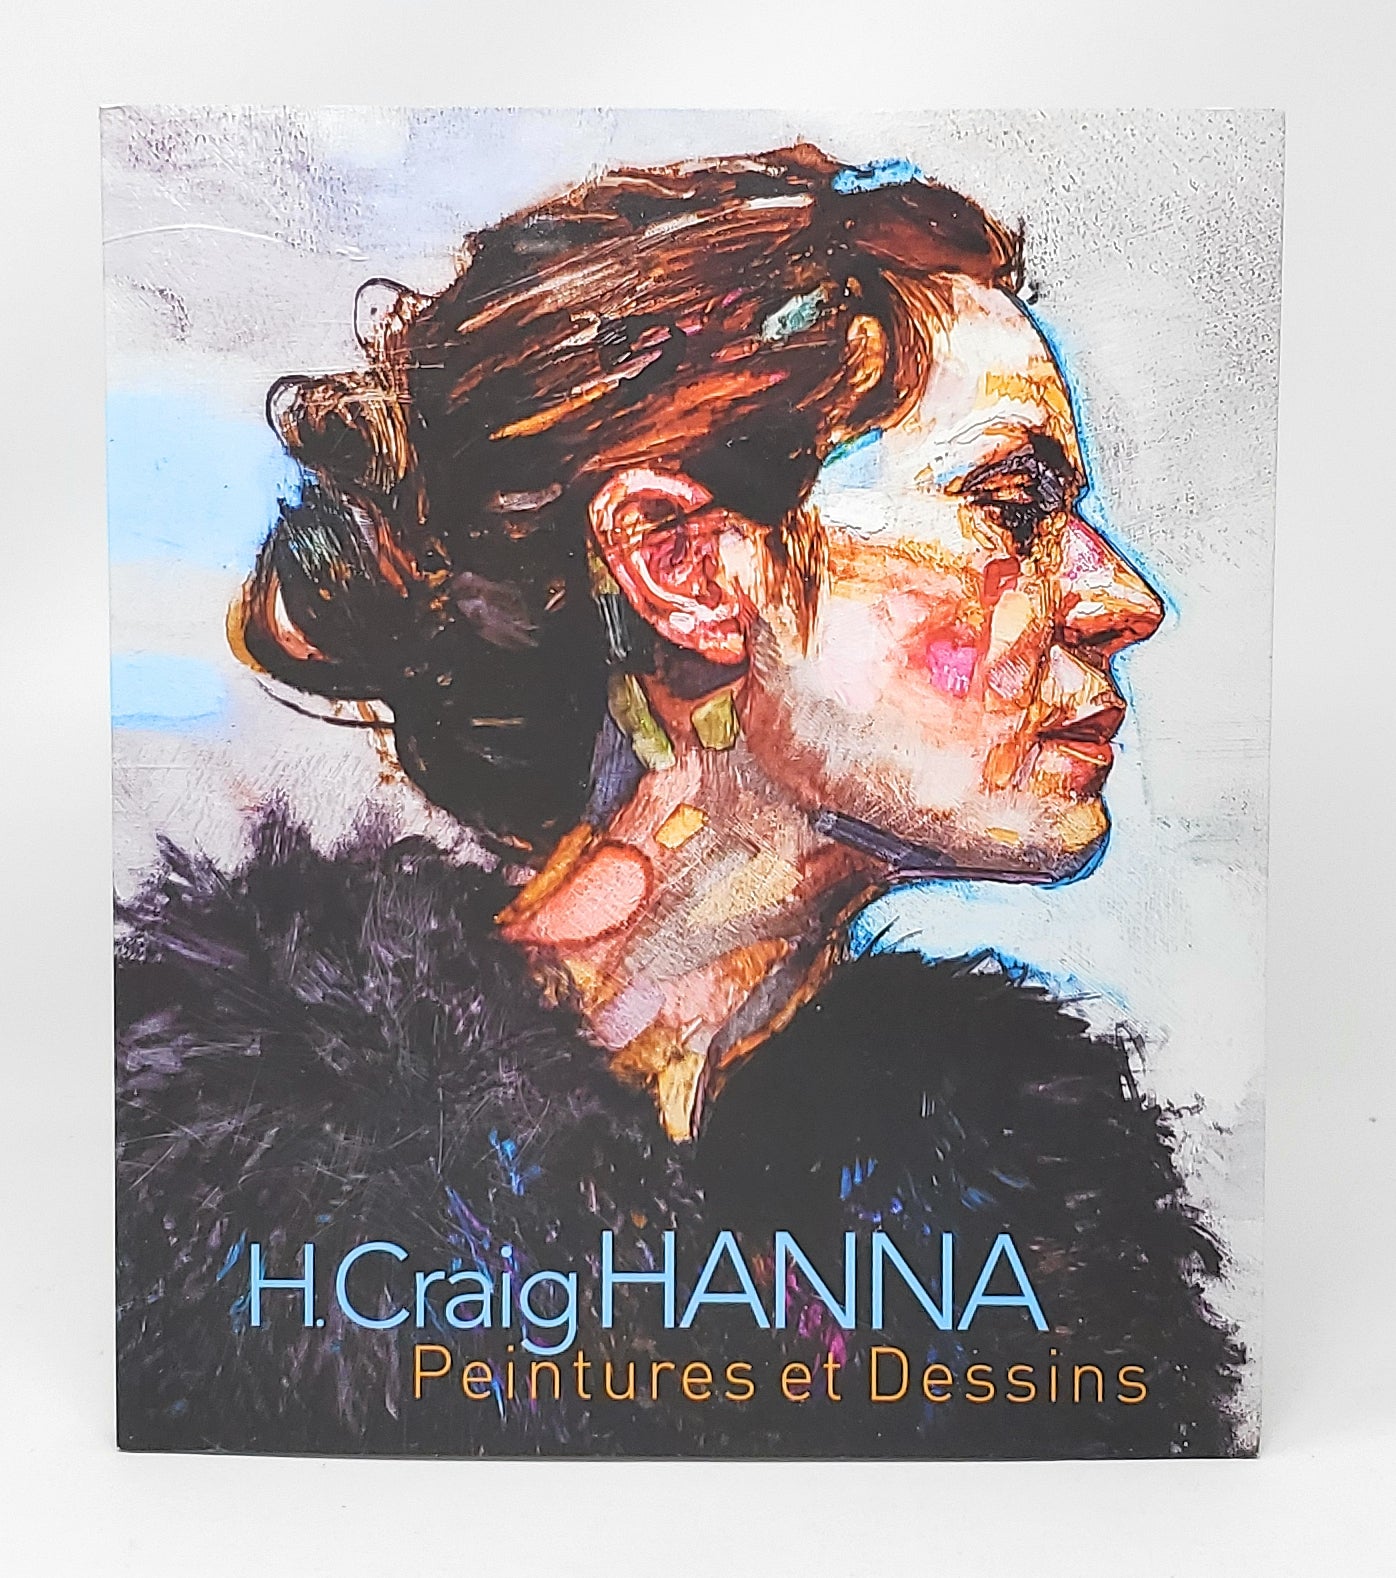 H. Craig Hanna: Peintures et Dessins Paintings and Drawings, French and  English Text by H. Craig Hanna on Underground Books